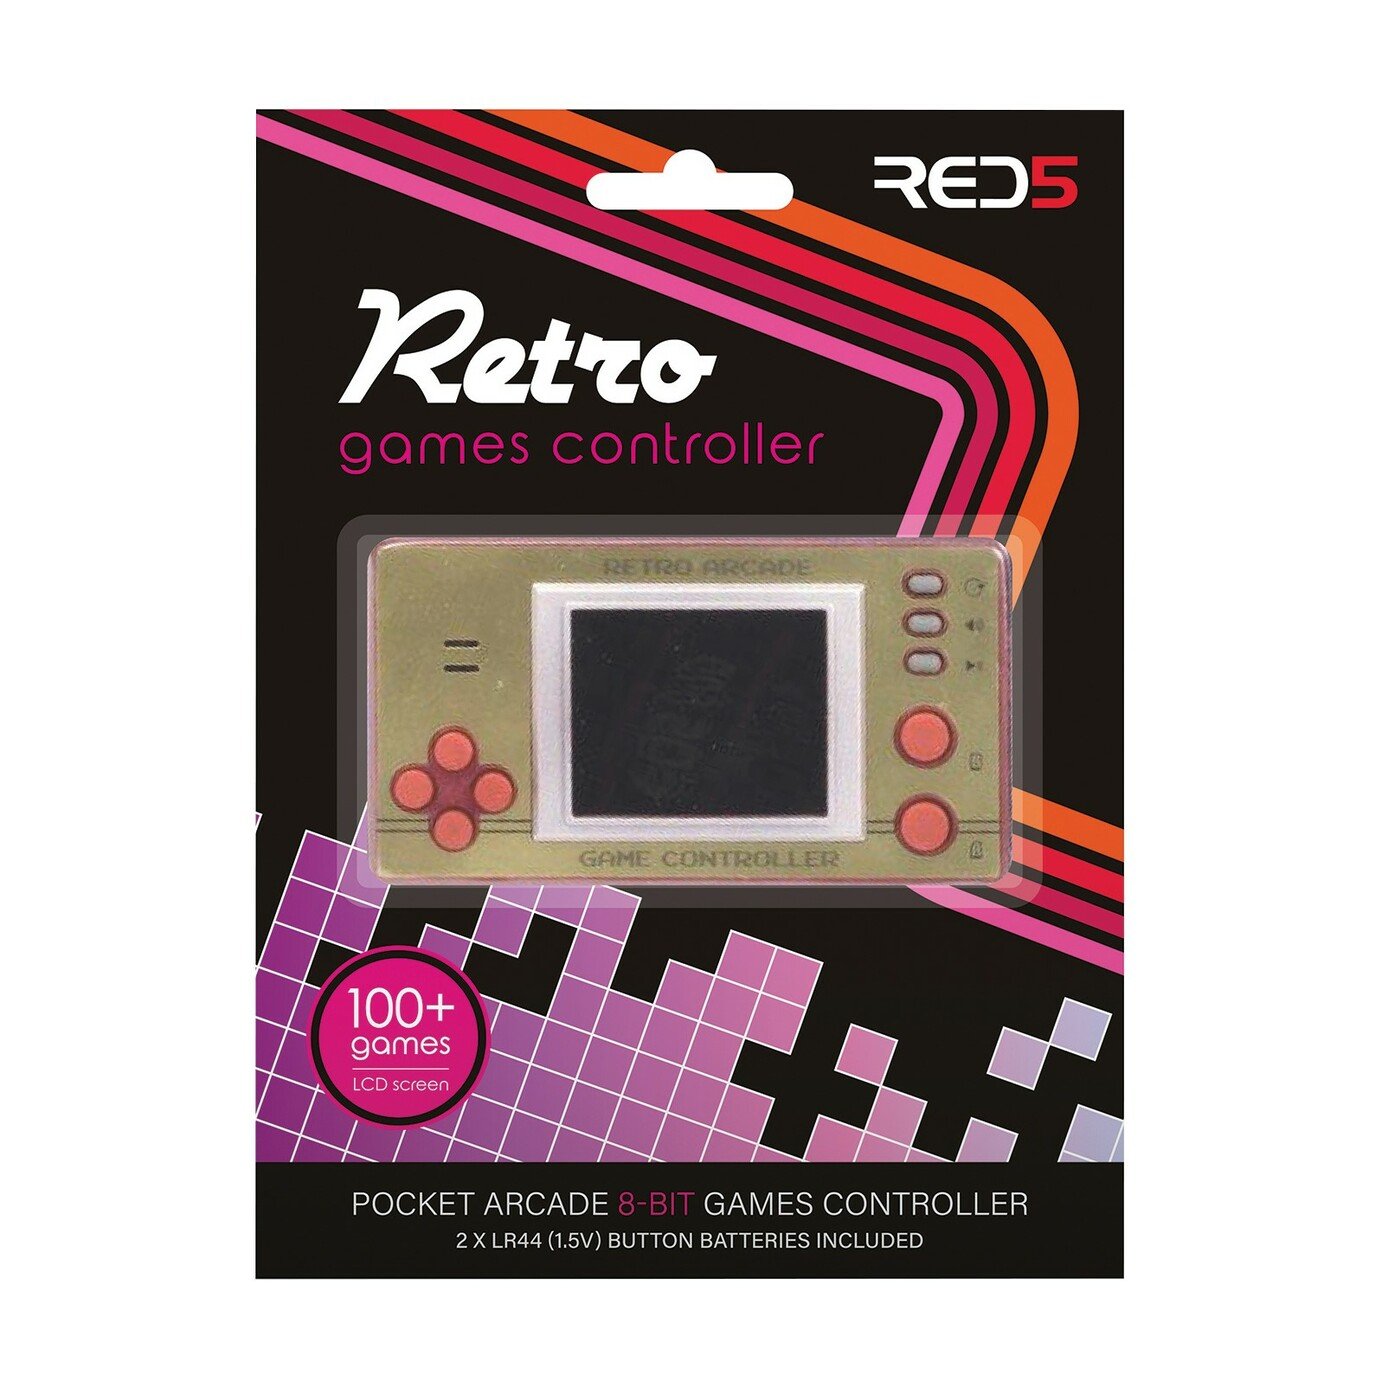 RED5 Retro Games Controller Review